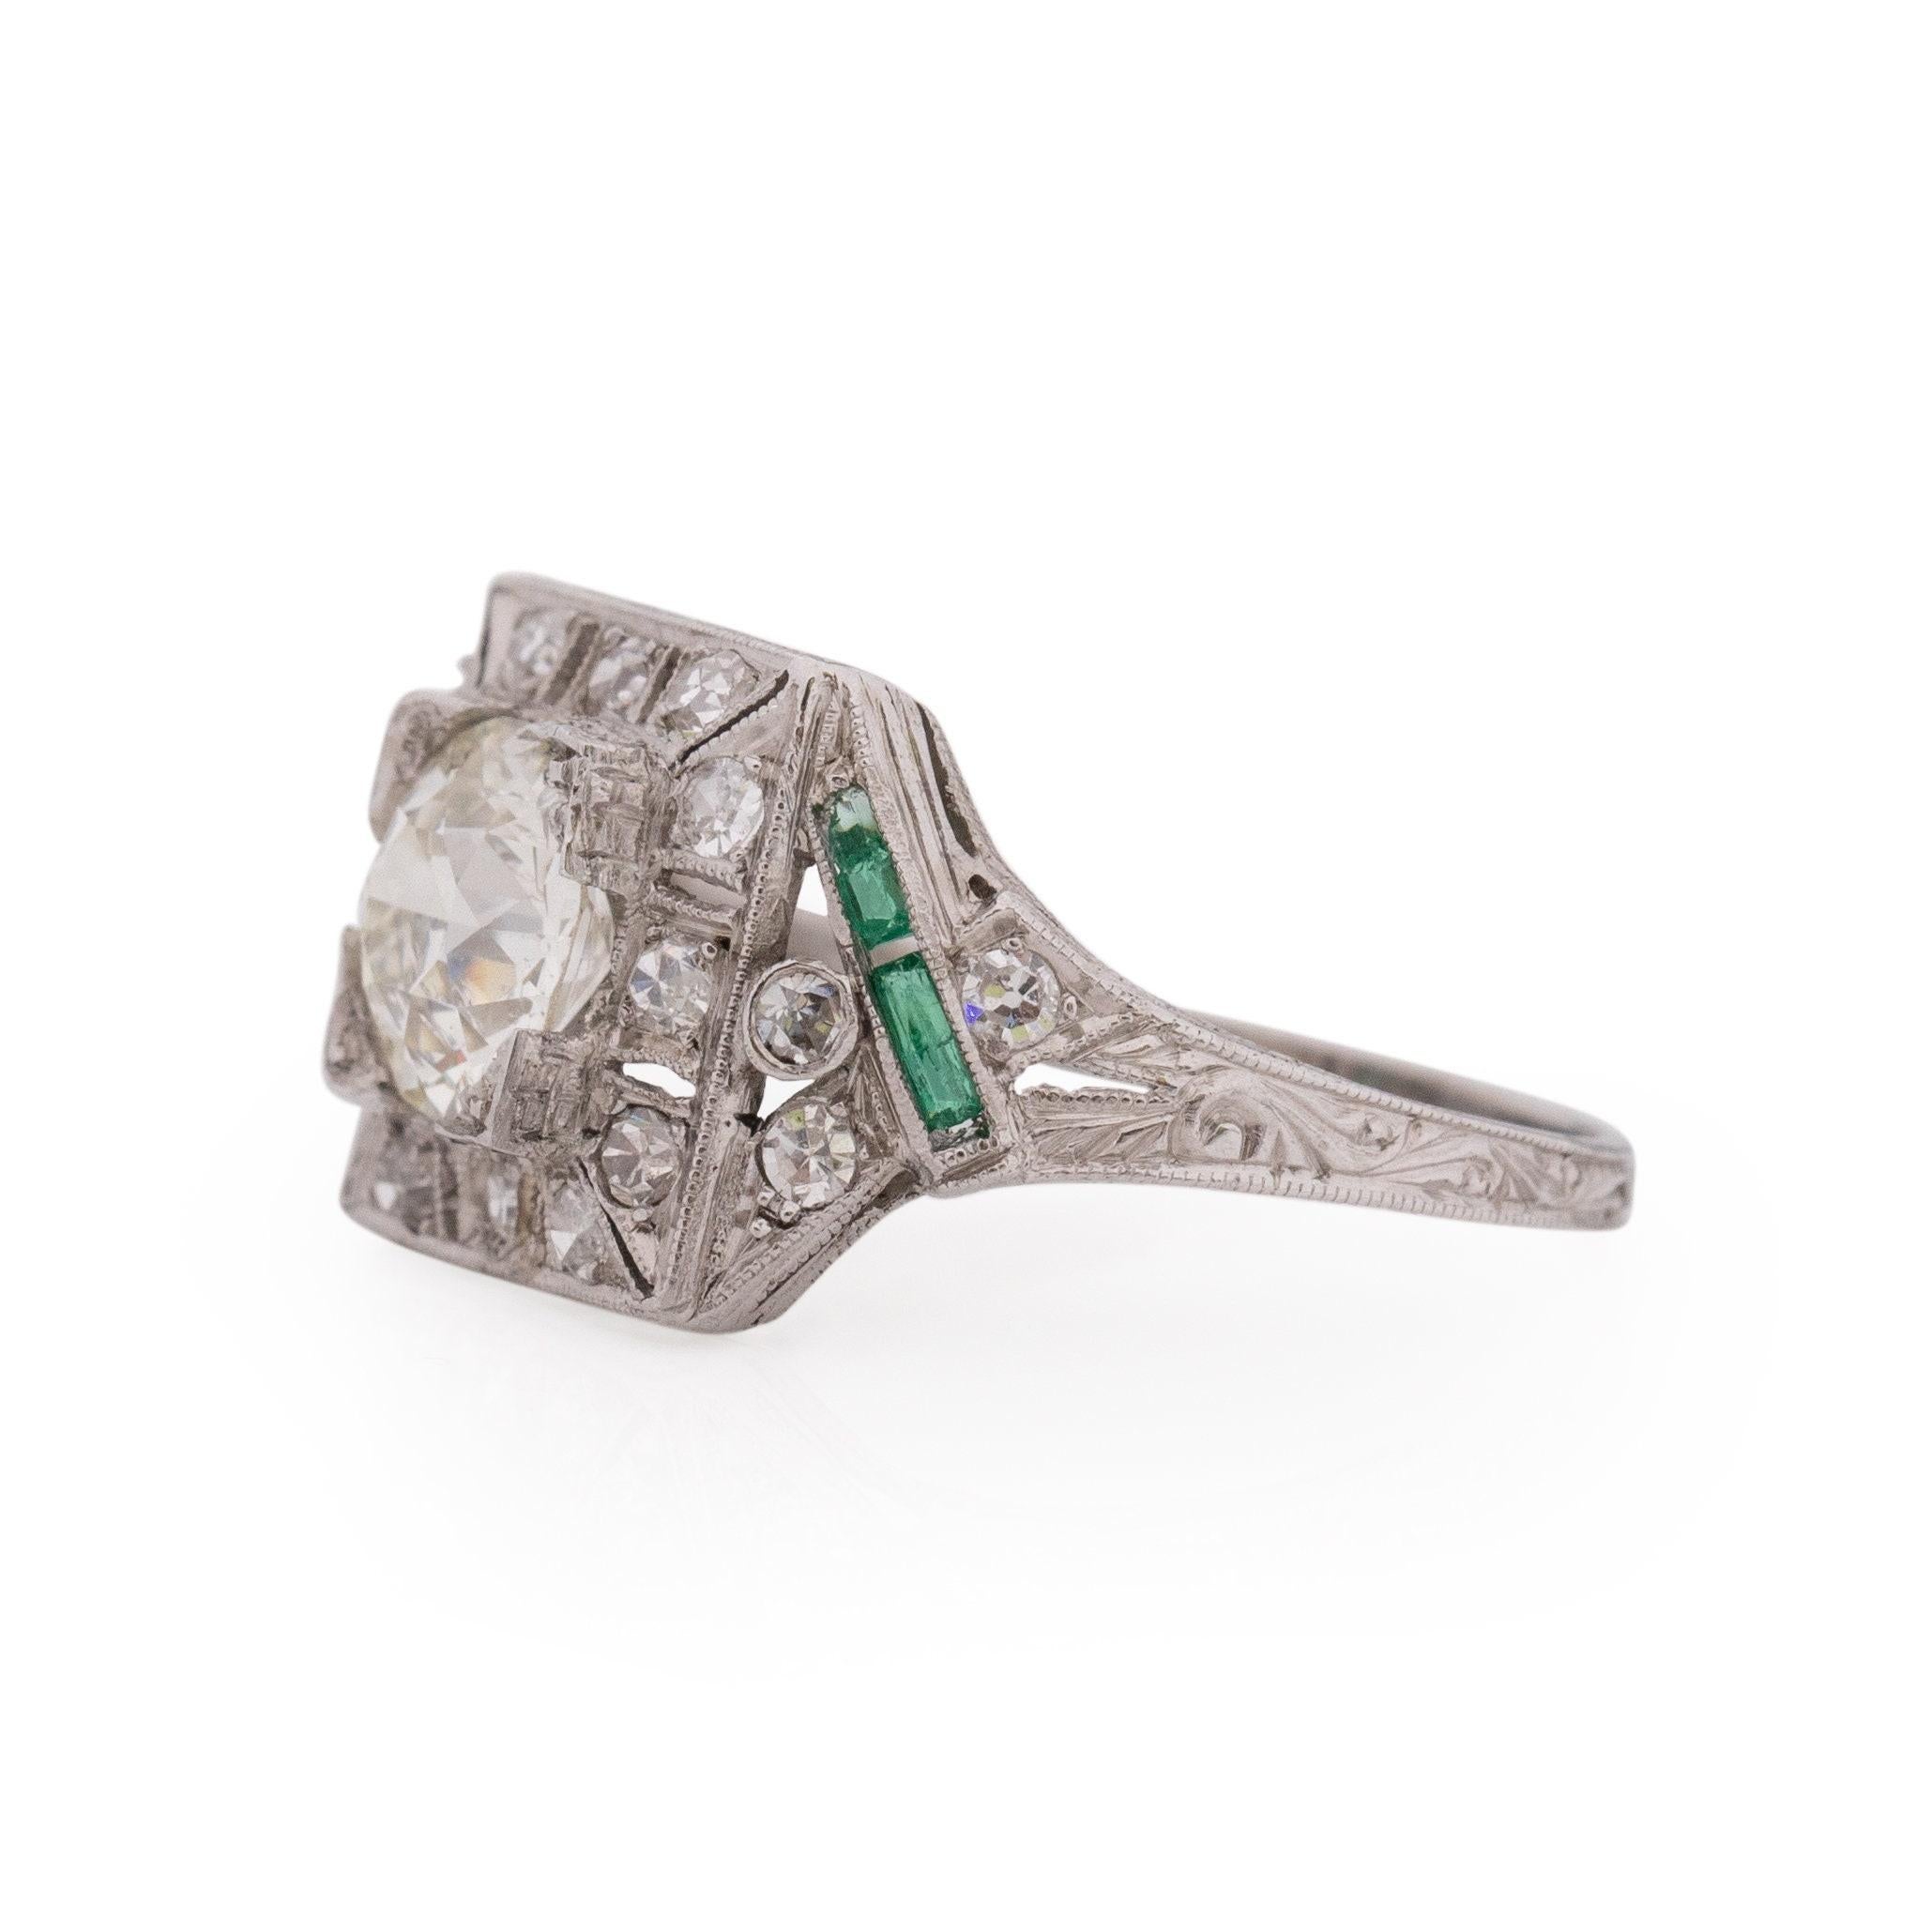 Women's Circa 1920's Art Deco Platinum 1.26 Ct GIA Certified Diamond and Emerald Ring For Sale